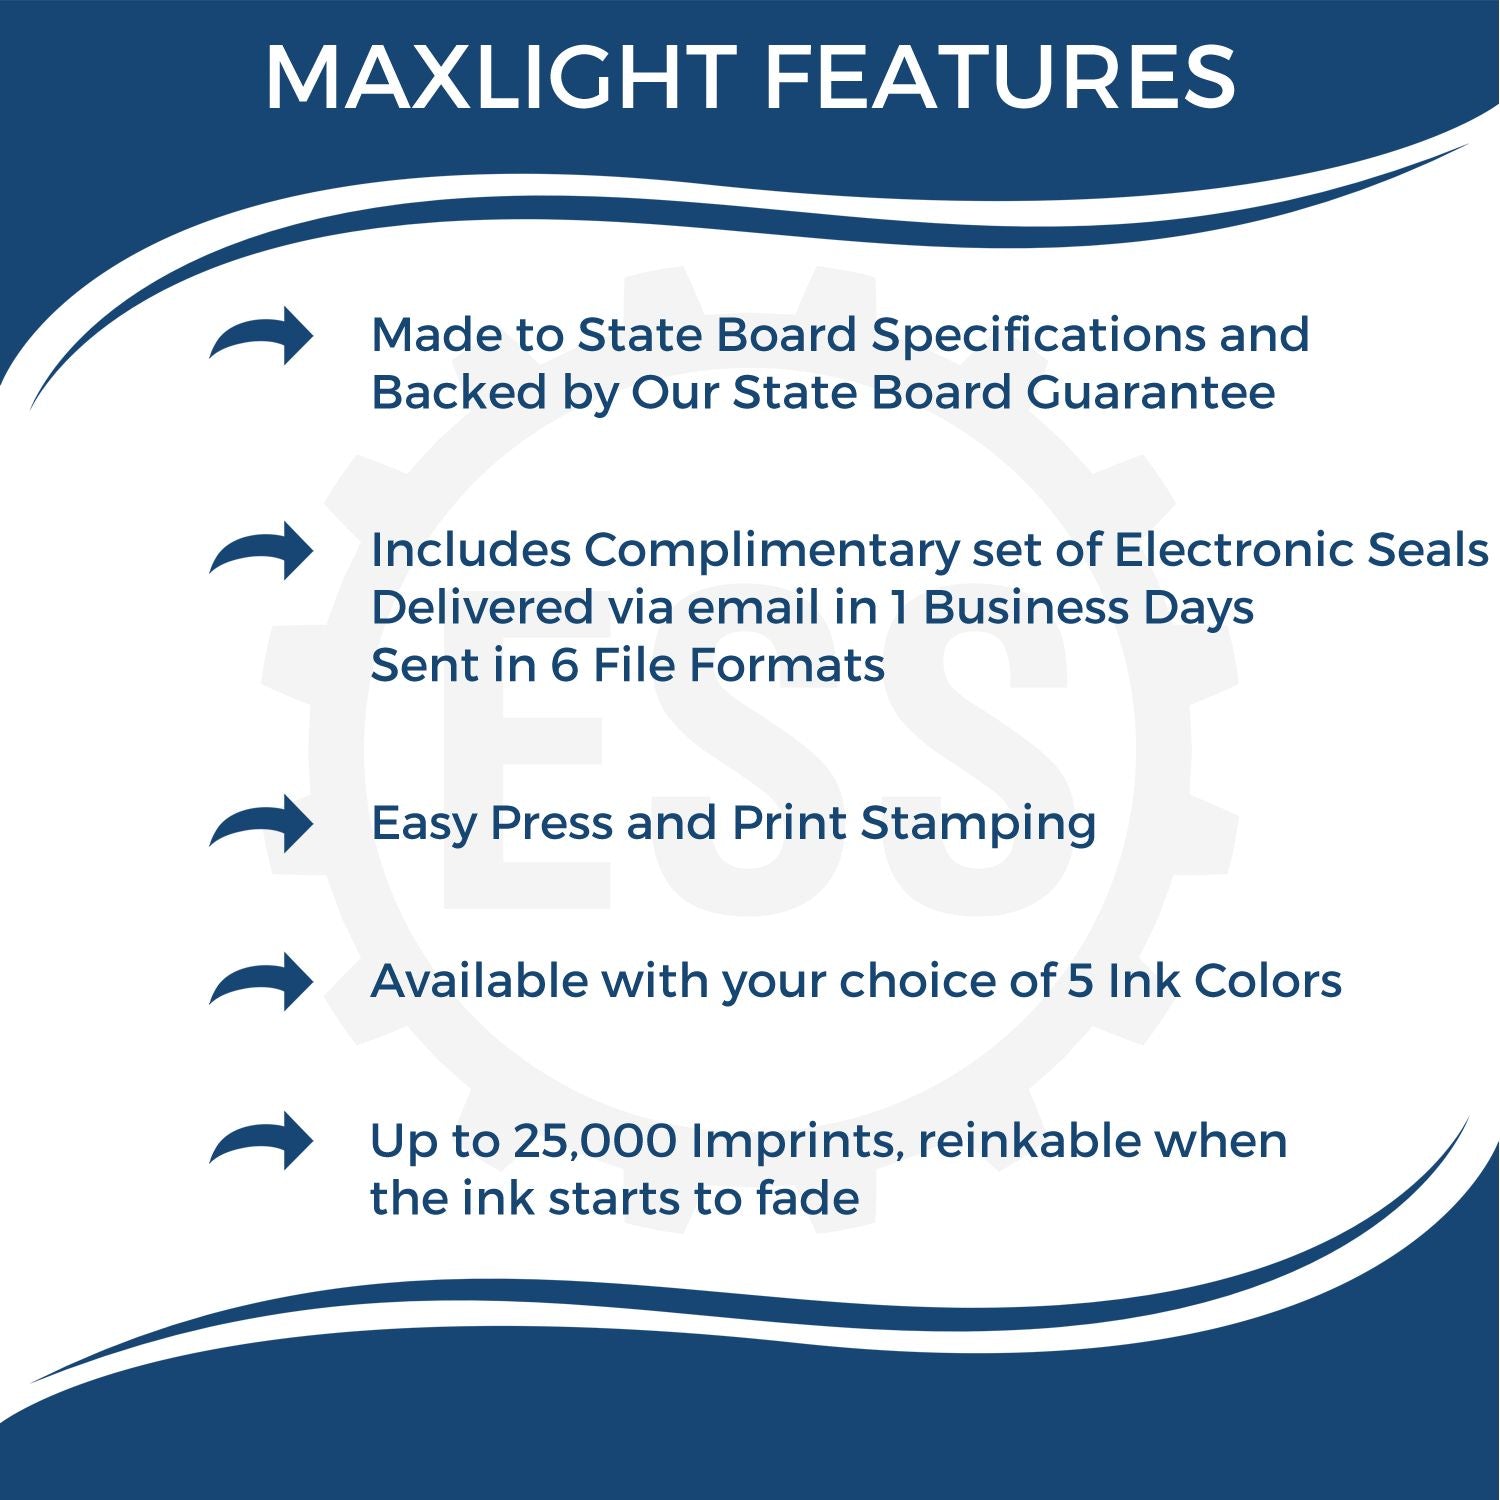 The main image for the Premium MaxLight Pre-Inked Rhode Is Landscape Architects Stamp depicting a sample of the imprint and electronic files